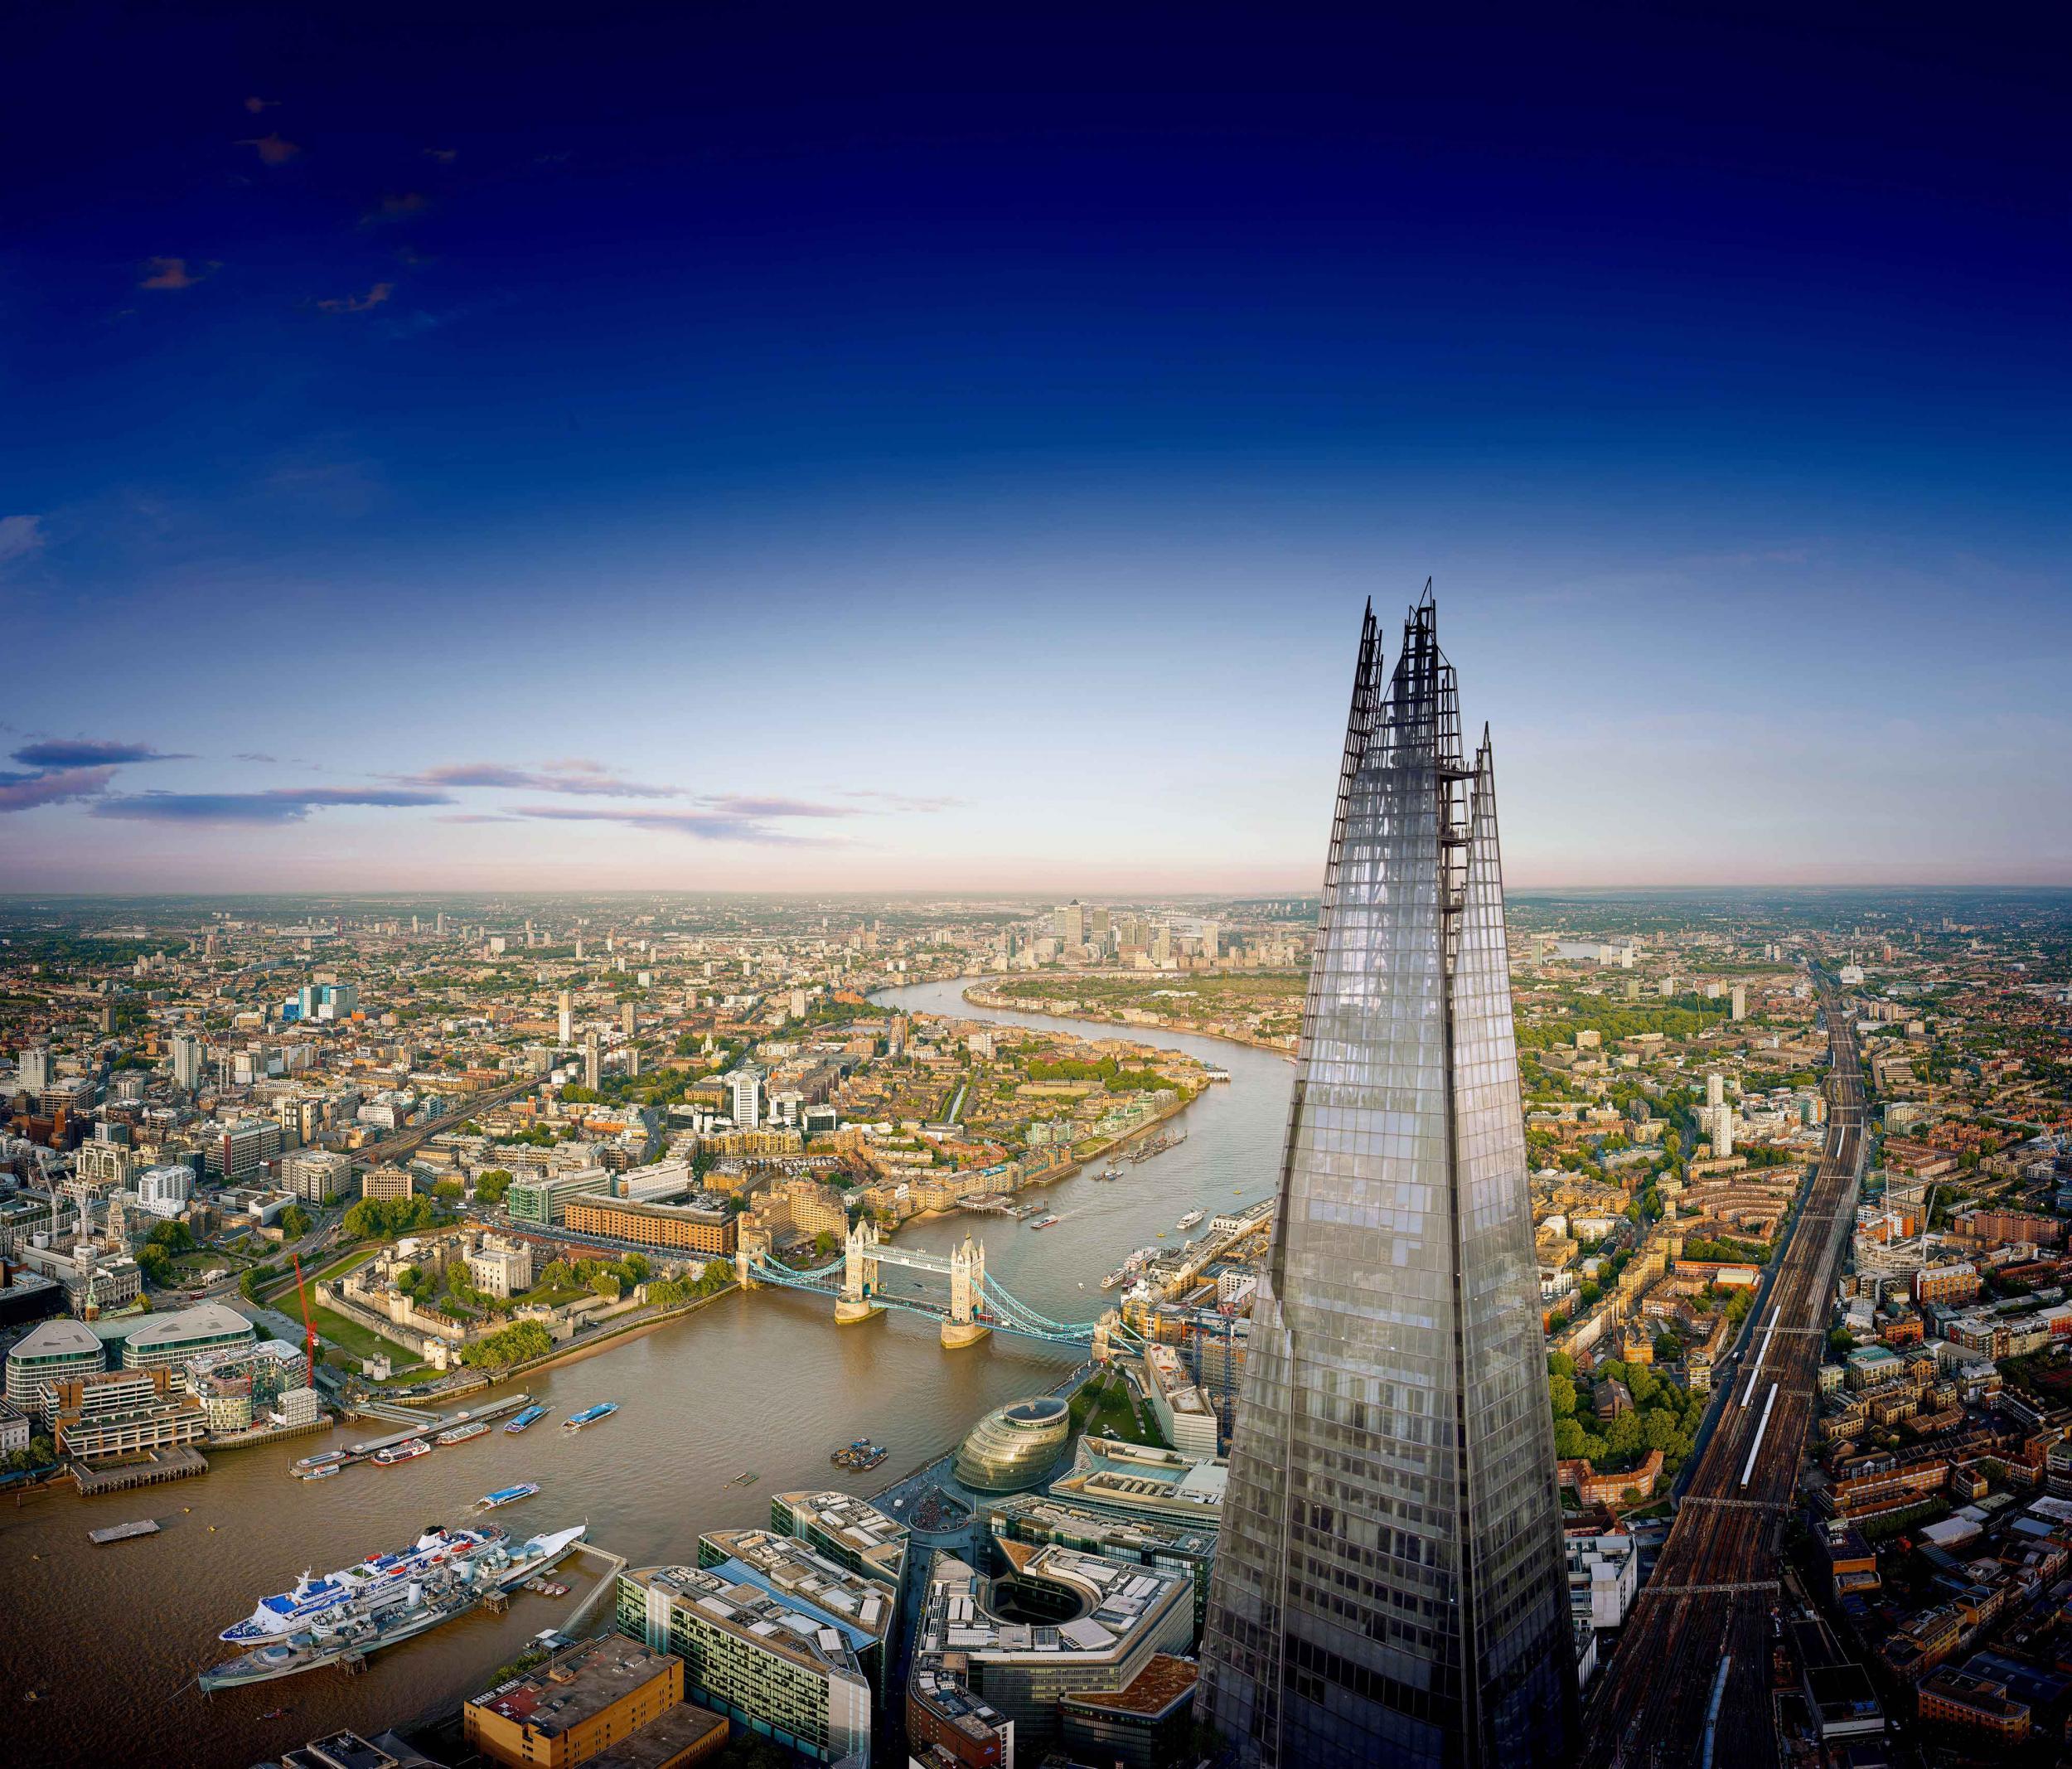 As venues for popping the question go, The Shard isn't too shoddy